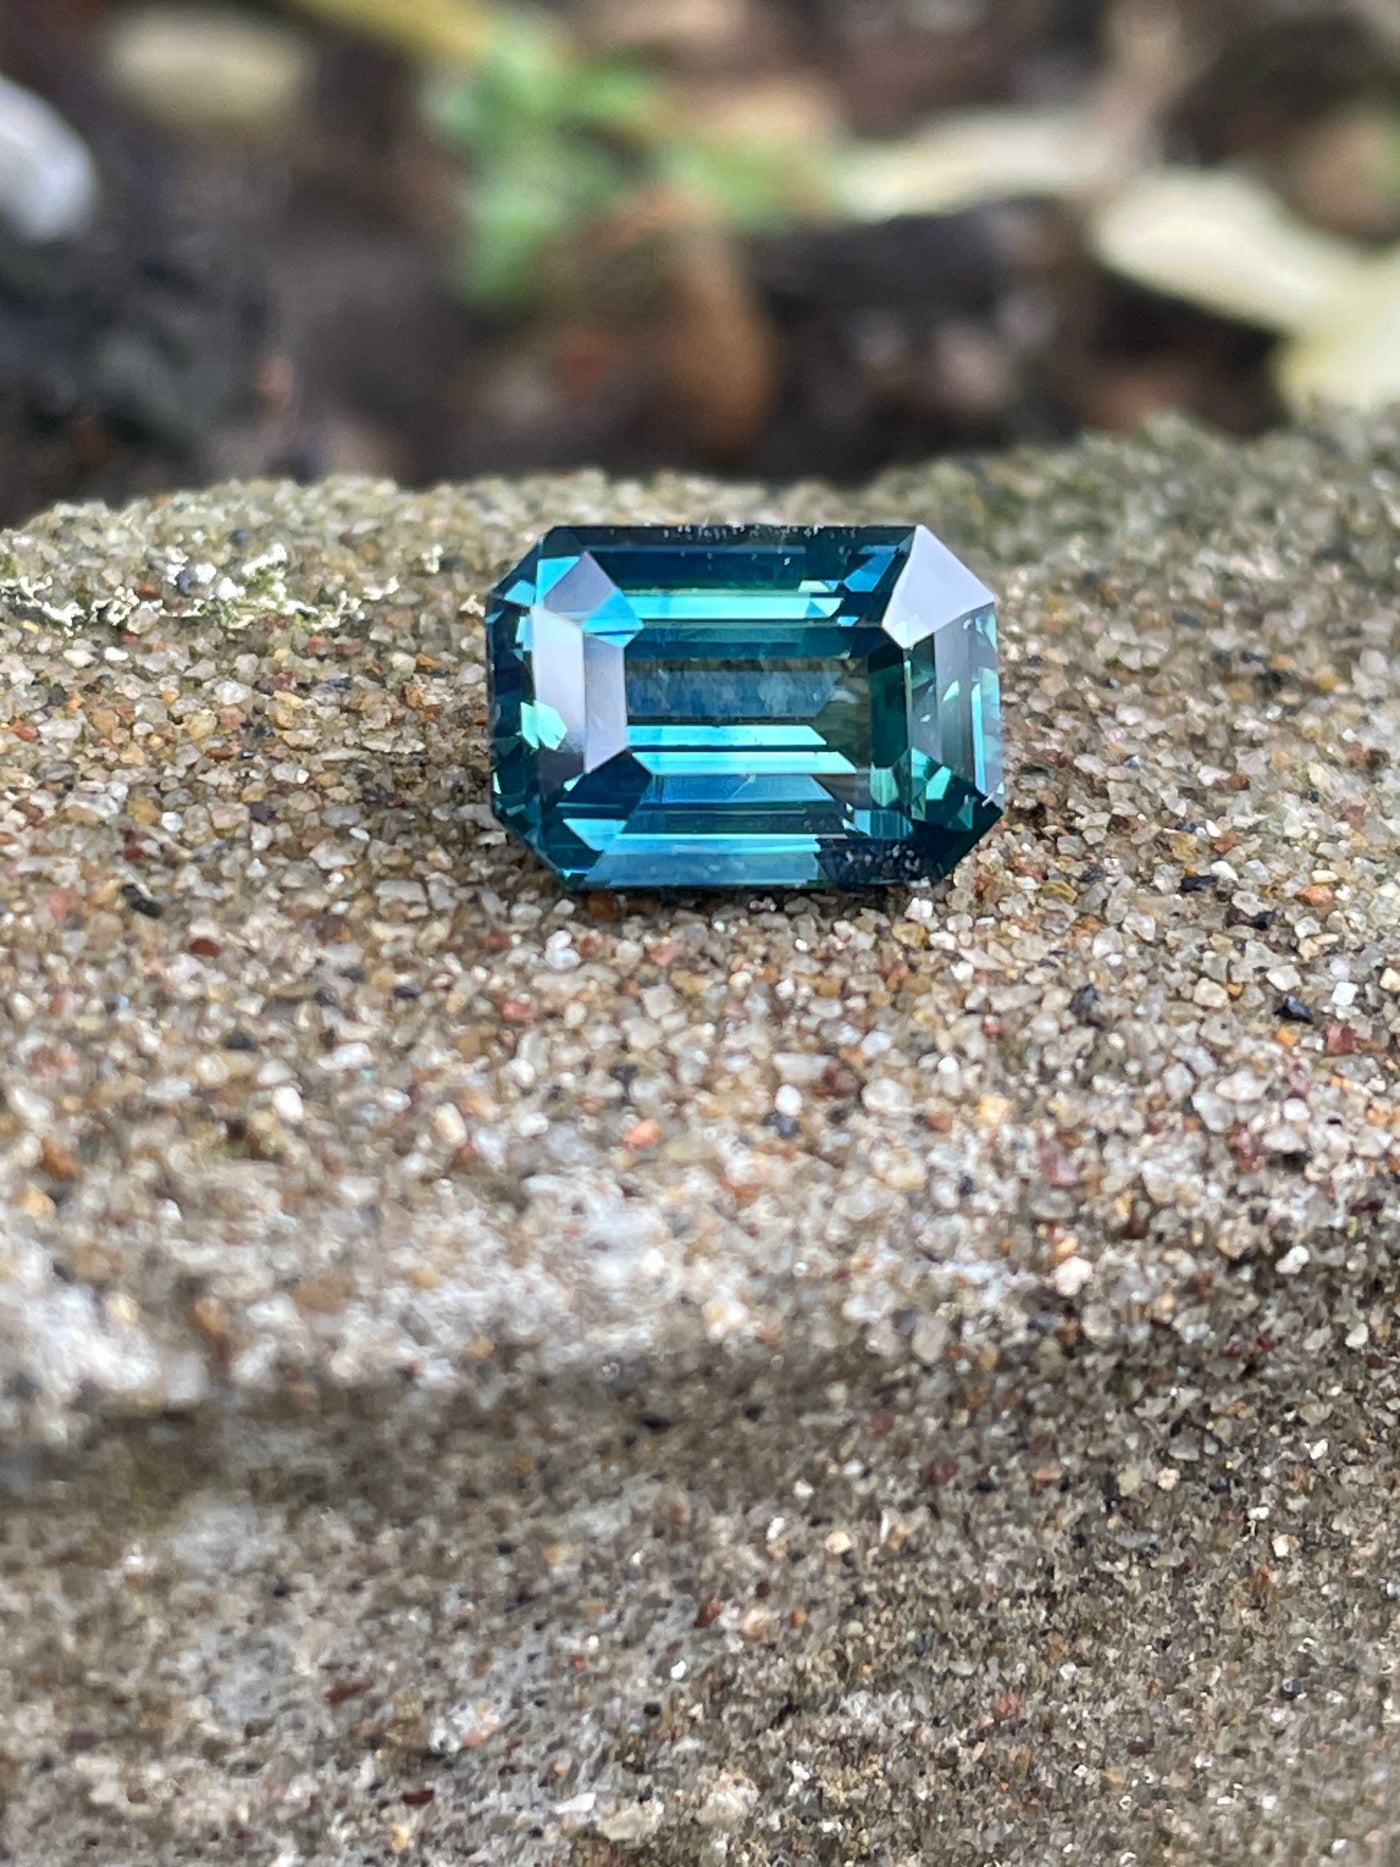 Teal Sapphire - 3.15 CT - Emerald- Madagascar- Fine Sapphire For Bespoke Engagement Ring